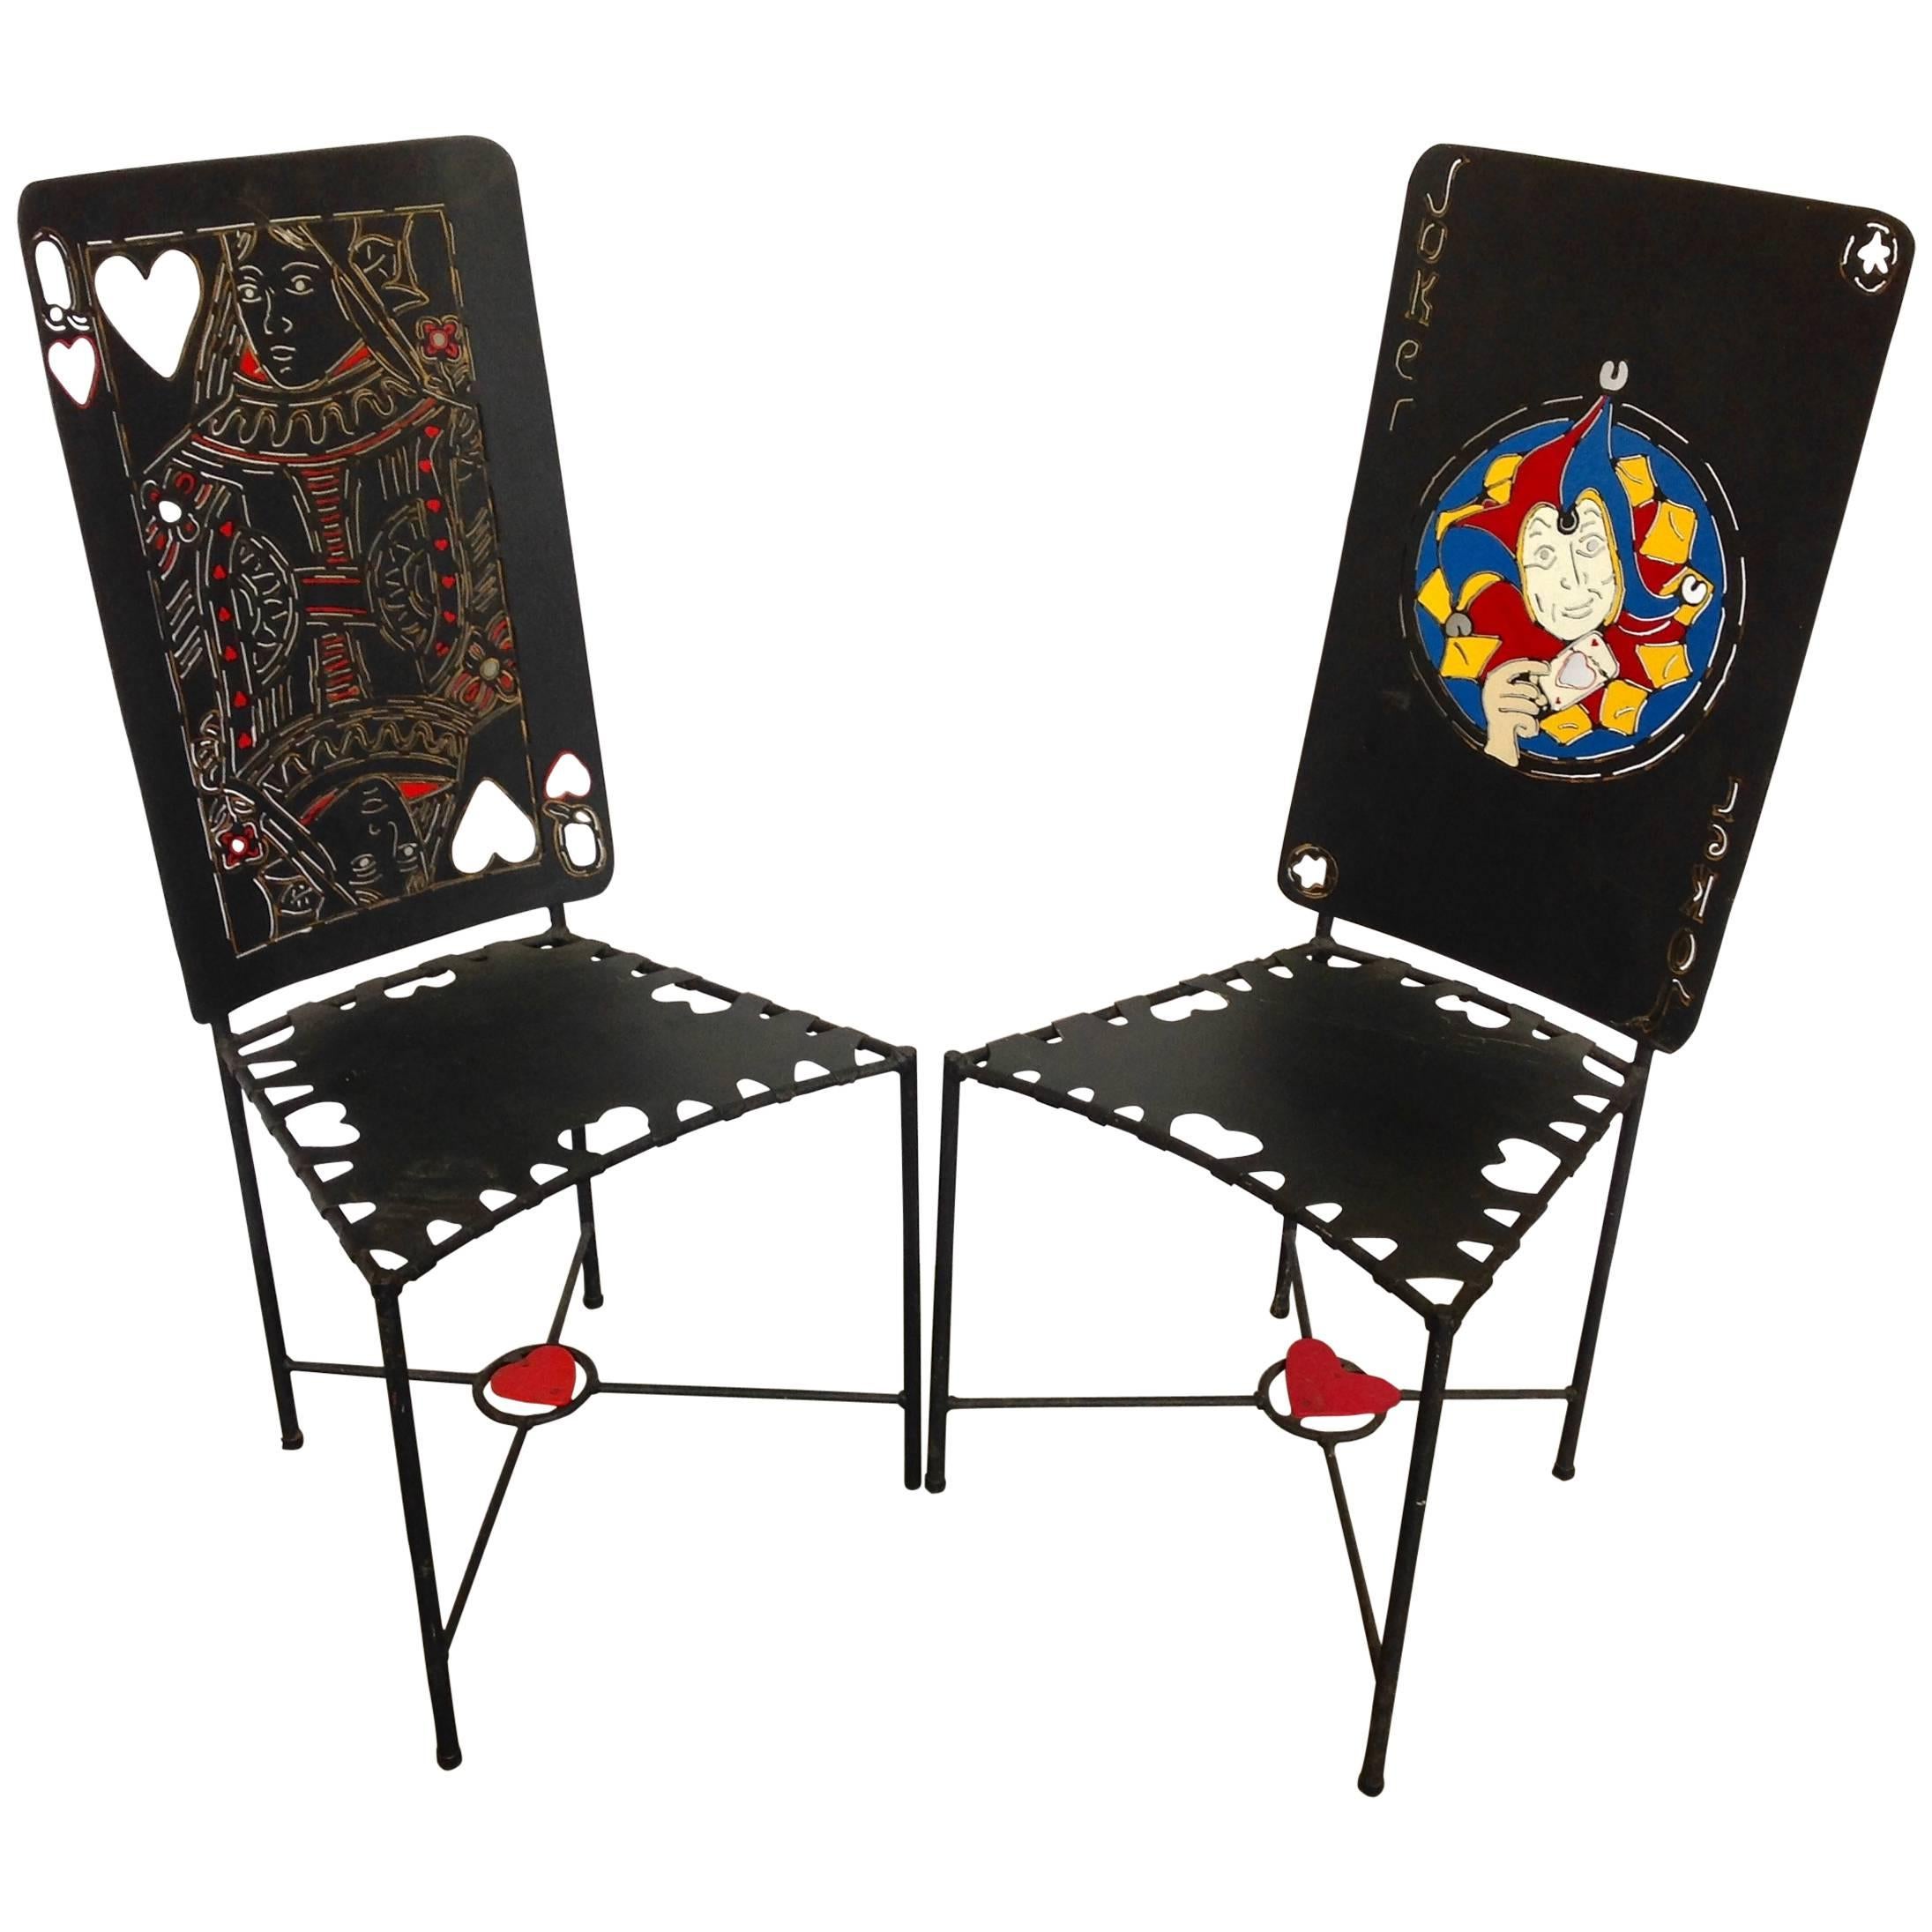 Painted Iron Playing Card Chairs Joker and Queen of Hearts For Sale